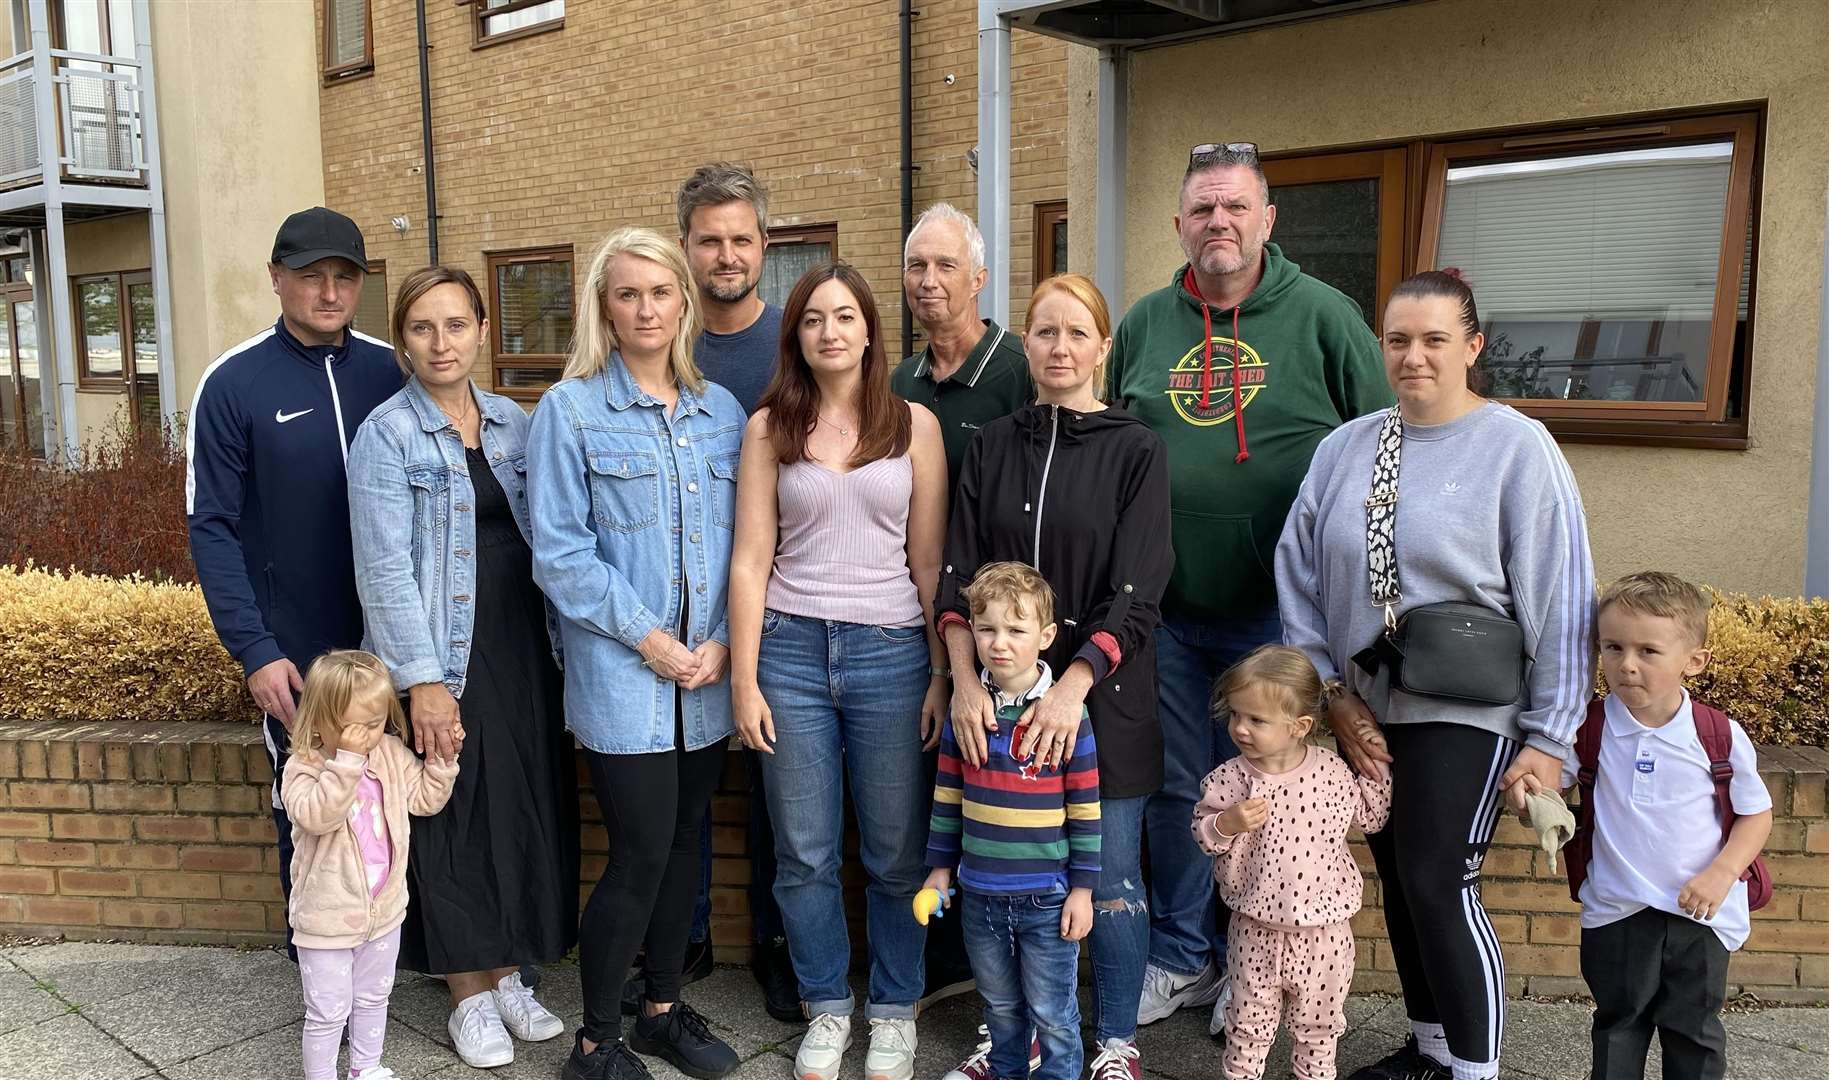 Residents living at the Thames Waterside developments in Greenhithe say they are stuck due to problems with cladding forms. From left to right: Adam Dybala, Natalia Dybala , Chloe Dunkley, Dan Dunkley, Emily Abbott, Roy Davis, Rachel Davis, Neil Corder, Jenny O’Brien.